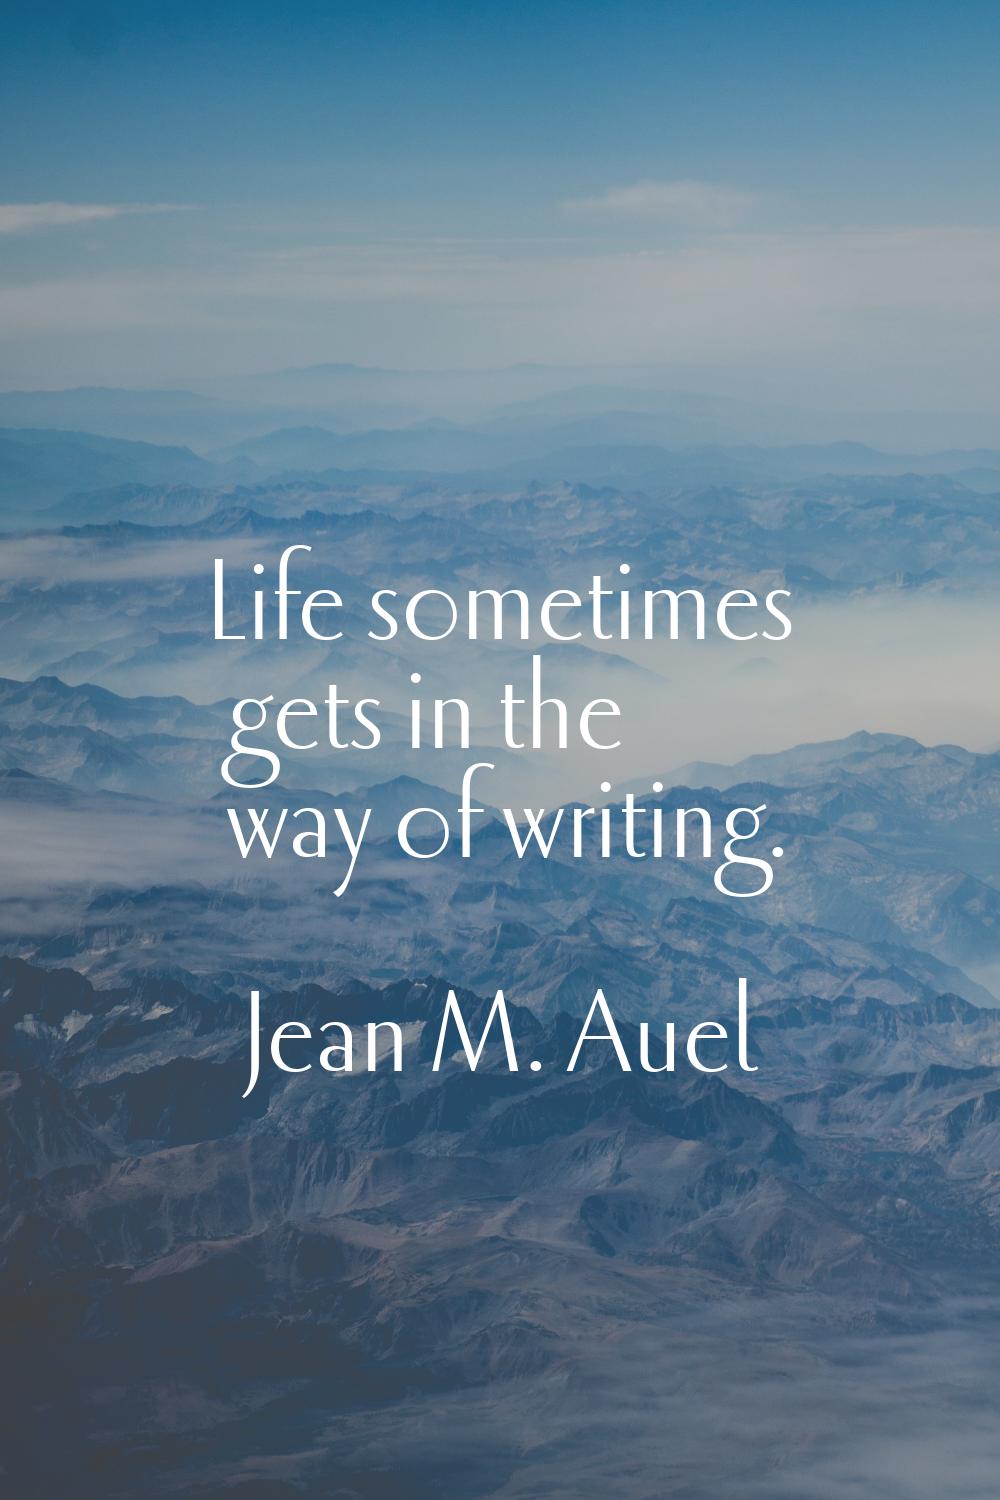 Life sometimes gets in the way of writing.